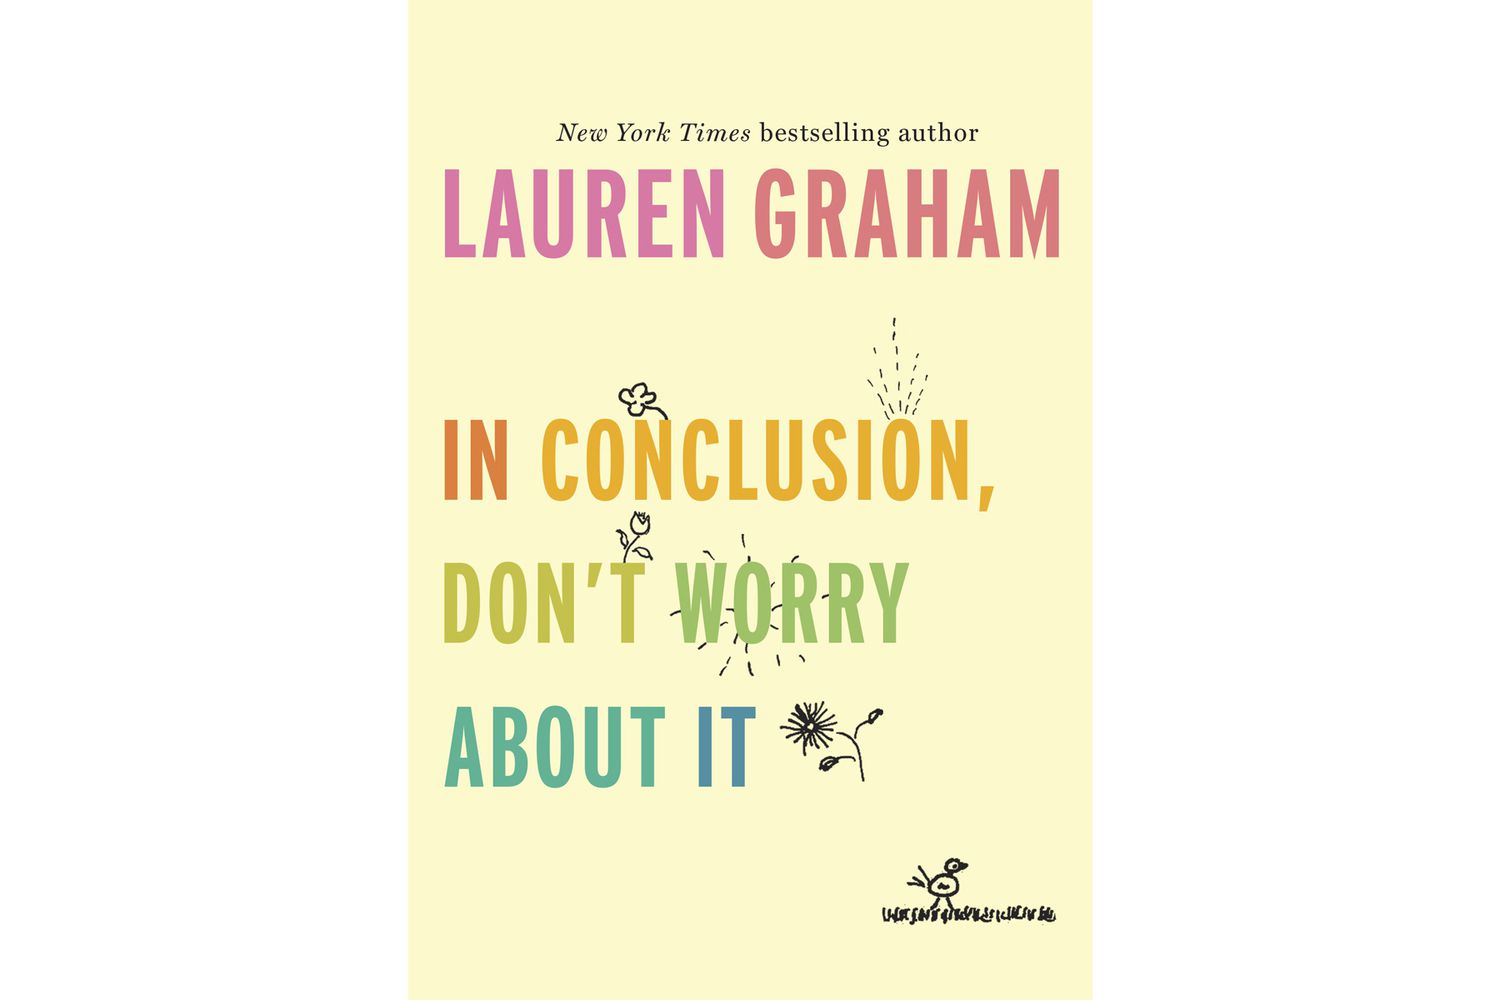 In Conclusion, Don’t Worry About It, by Lauren Graham